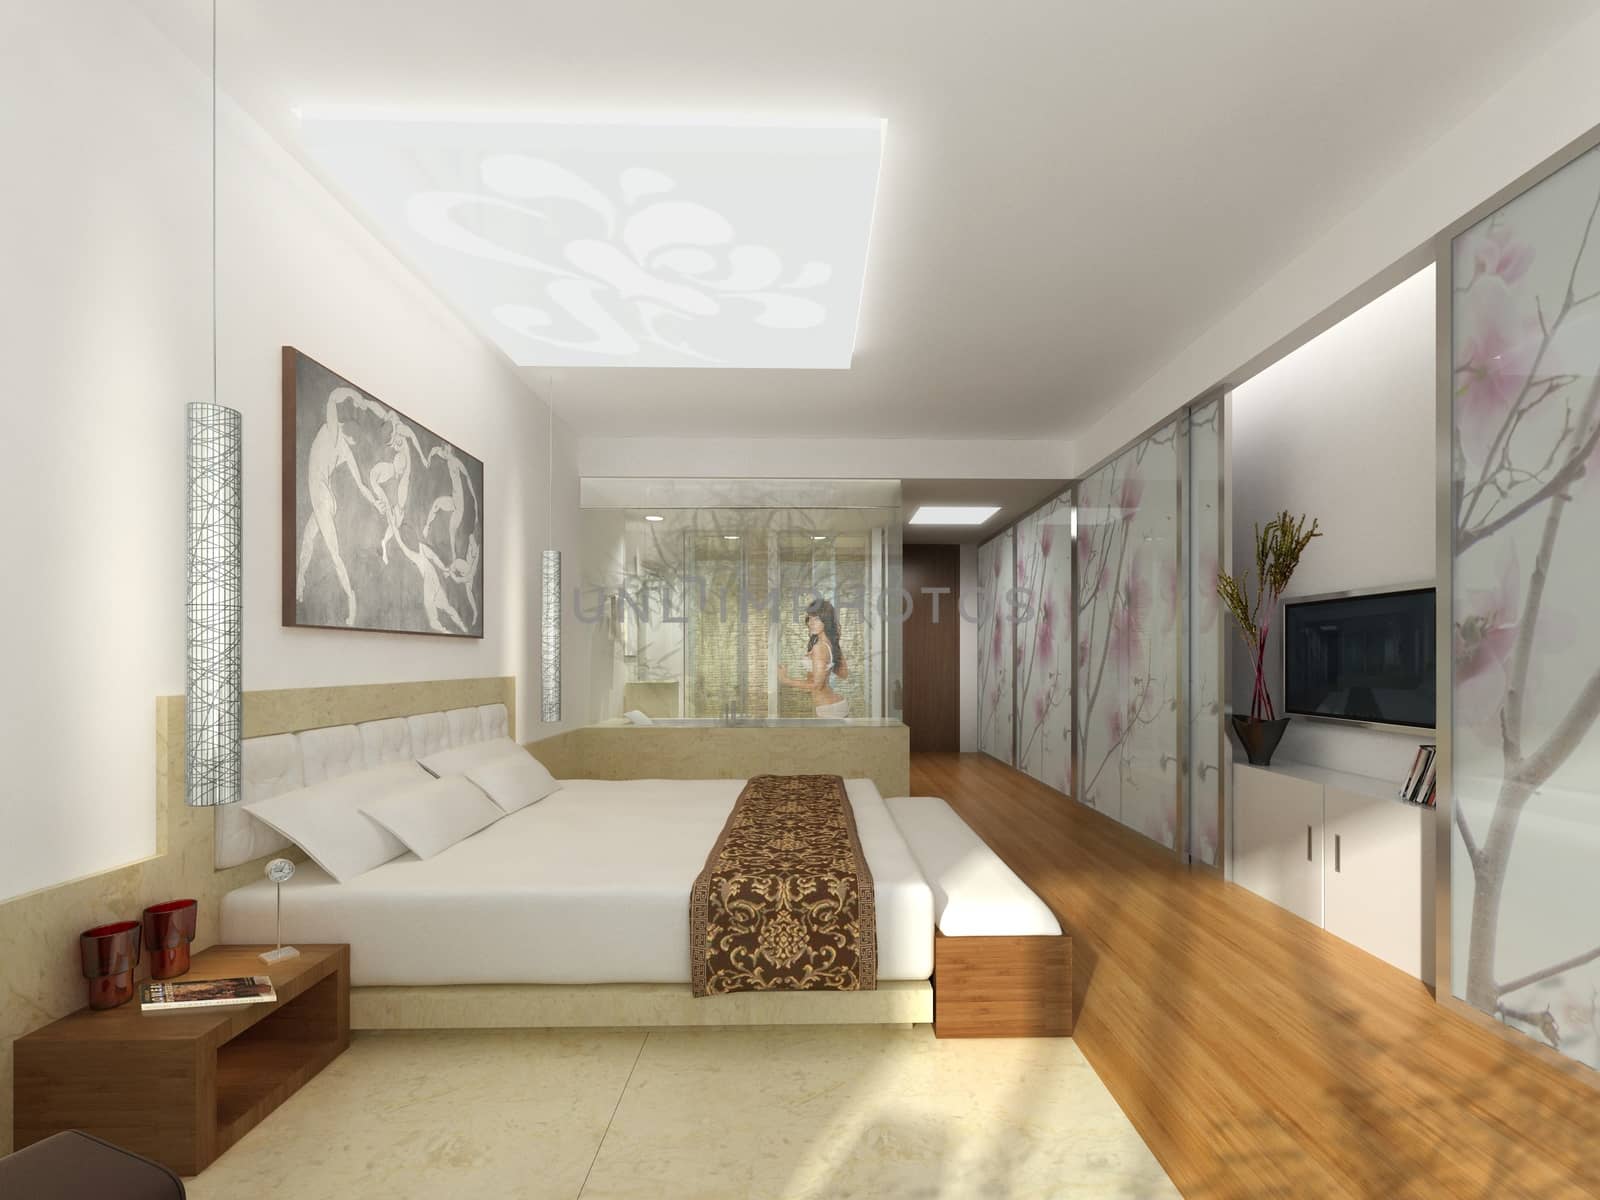 A visualization of an interior design for a living area plus hotel